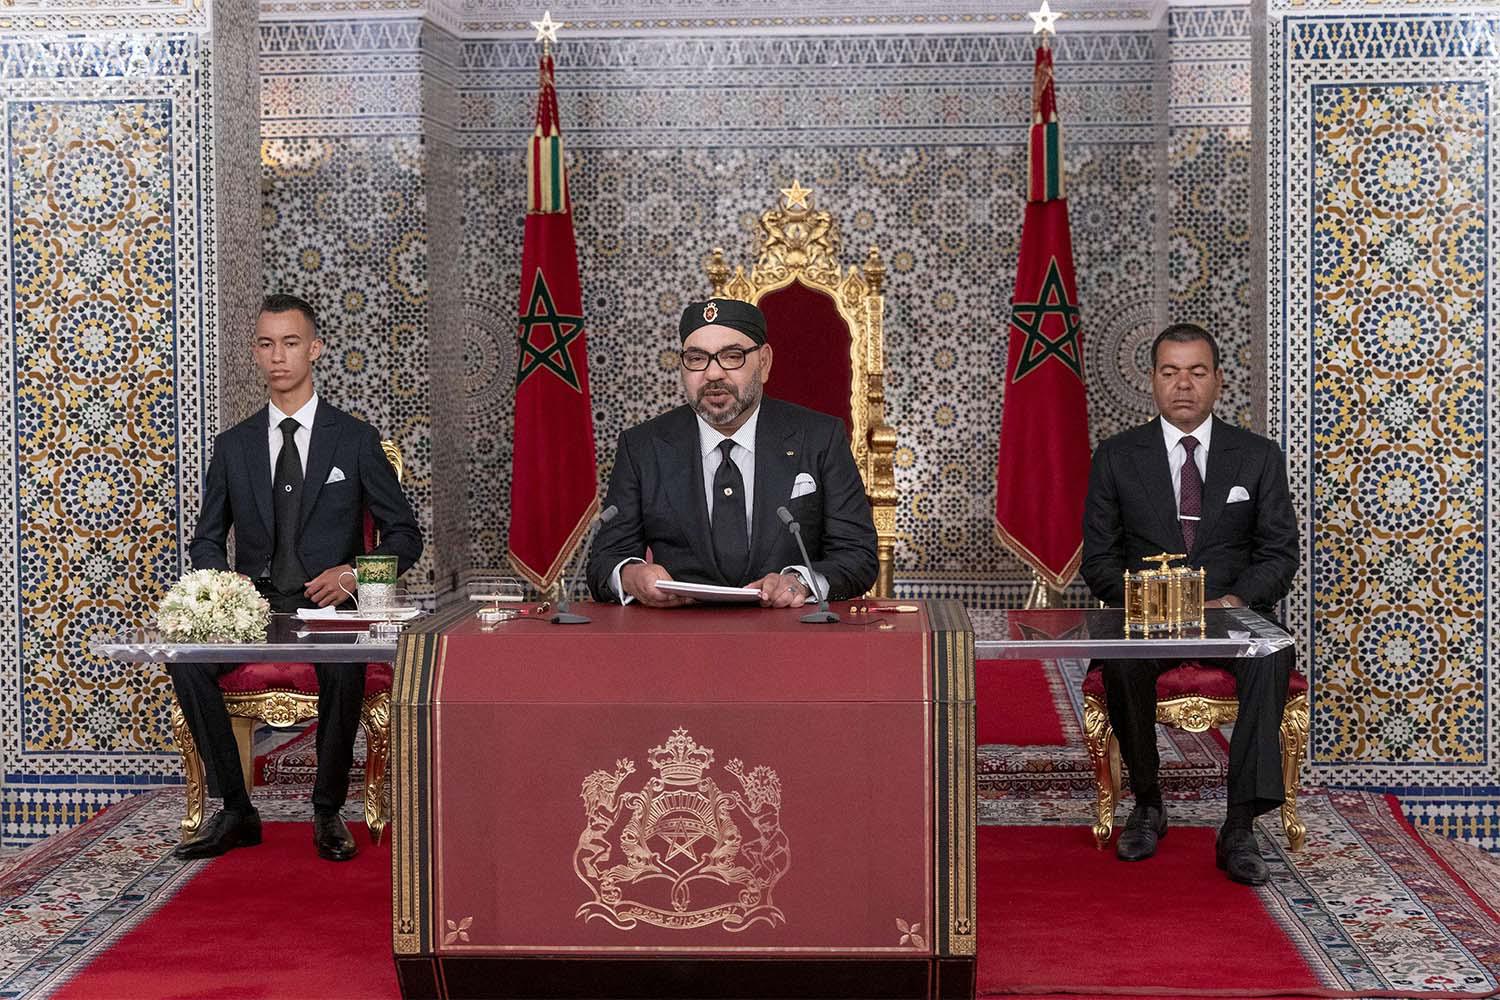 Morocco's King Mohammed VI, center, accompanied by his son Crown Prince Moulay Hassan, left, and brother Prince Moulay Rachid